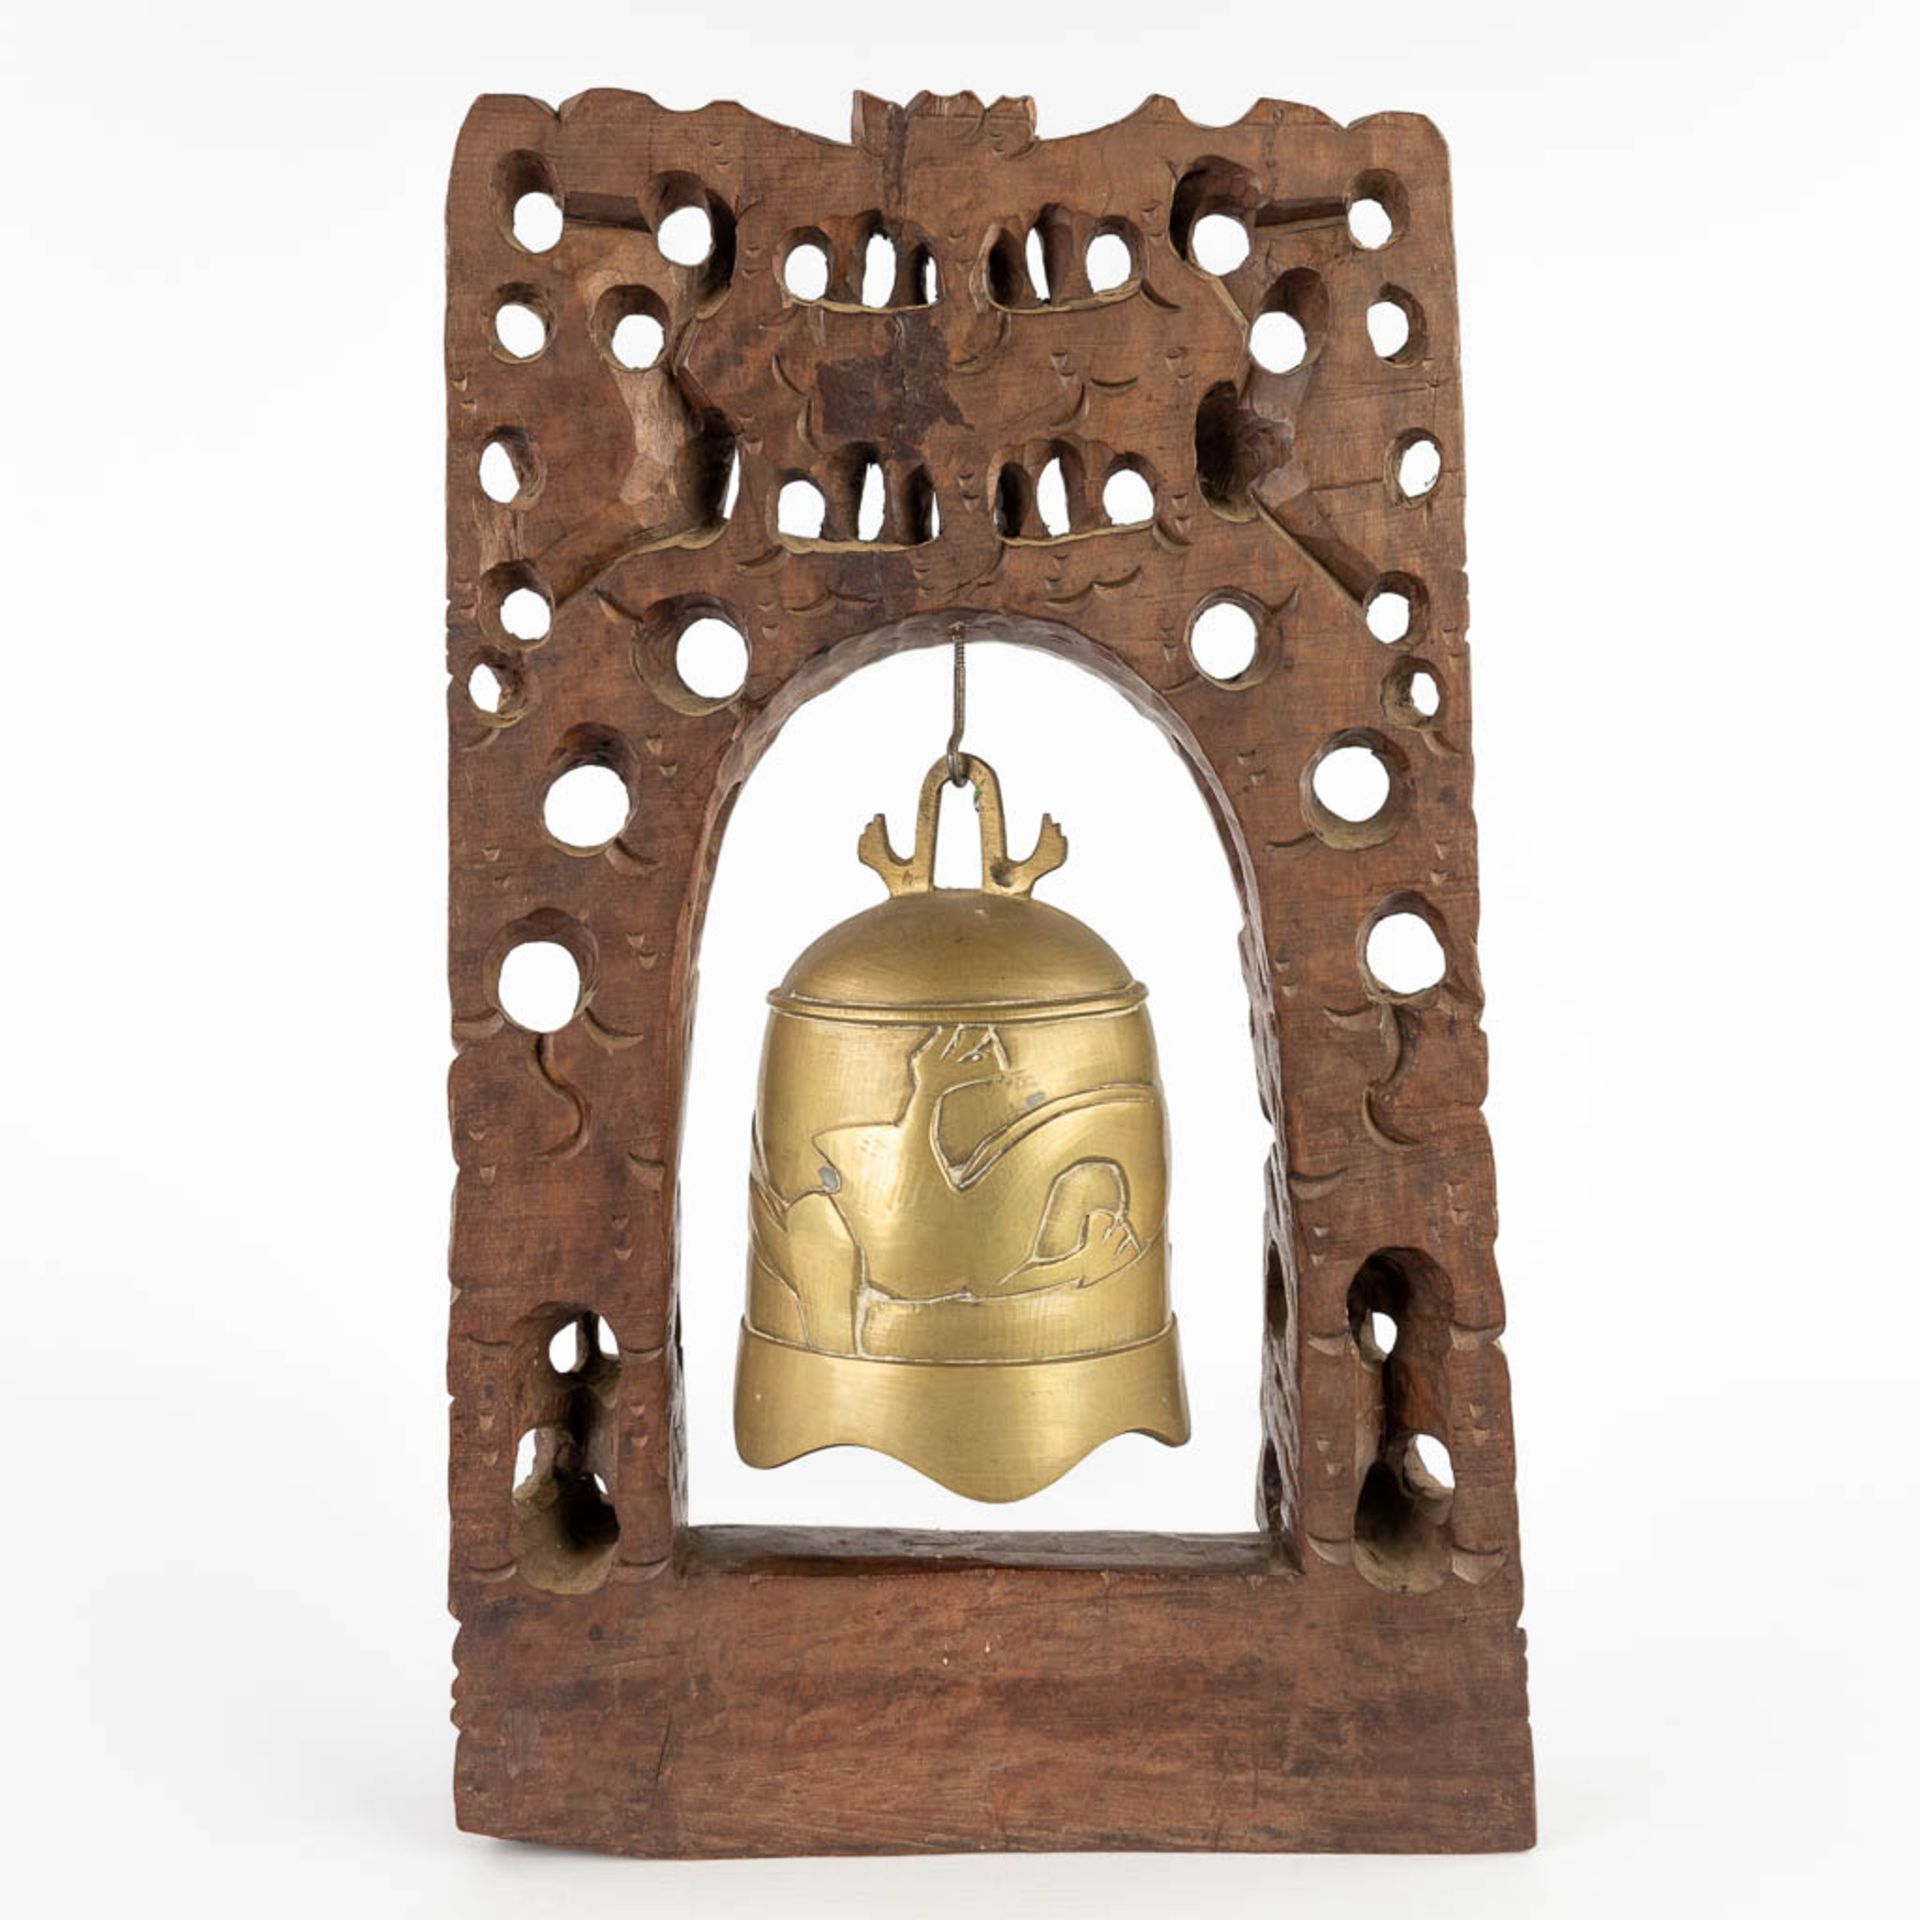 3 bells and a gong, Oriental. 19th/20th C. (L:13 x W:47 x H:55 cm) - Image 23 of 28